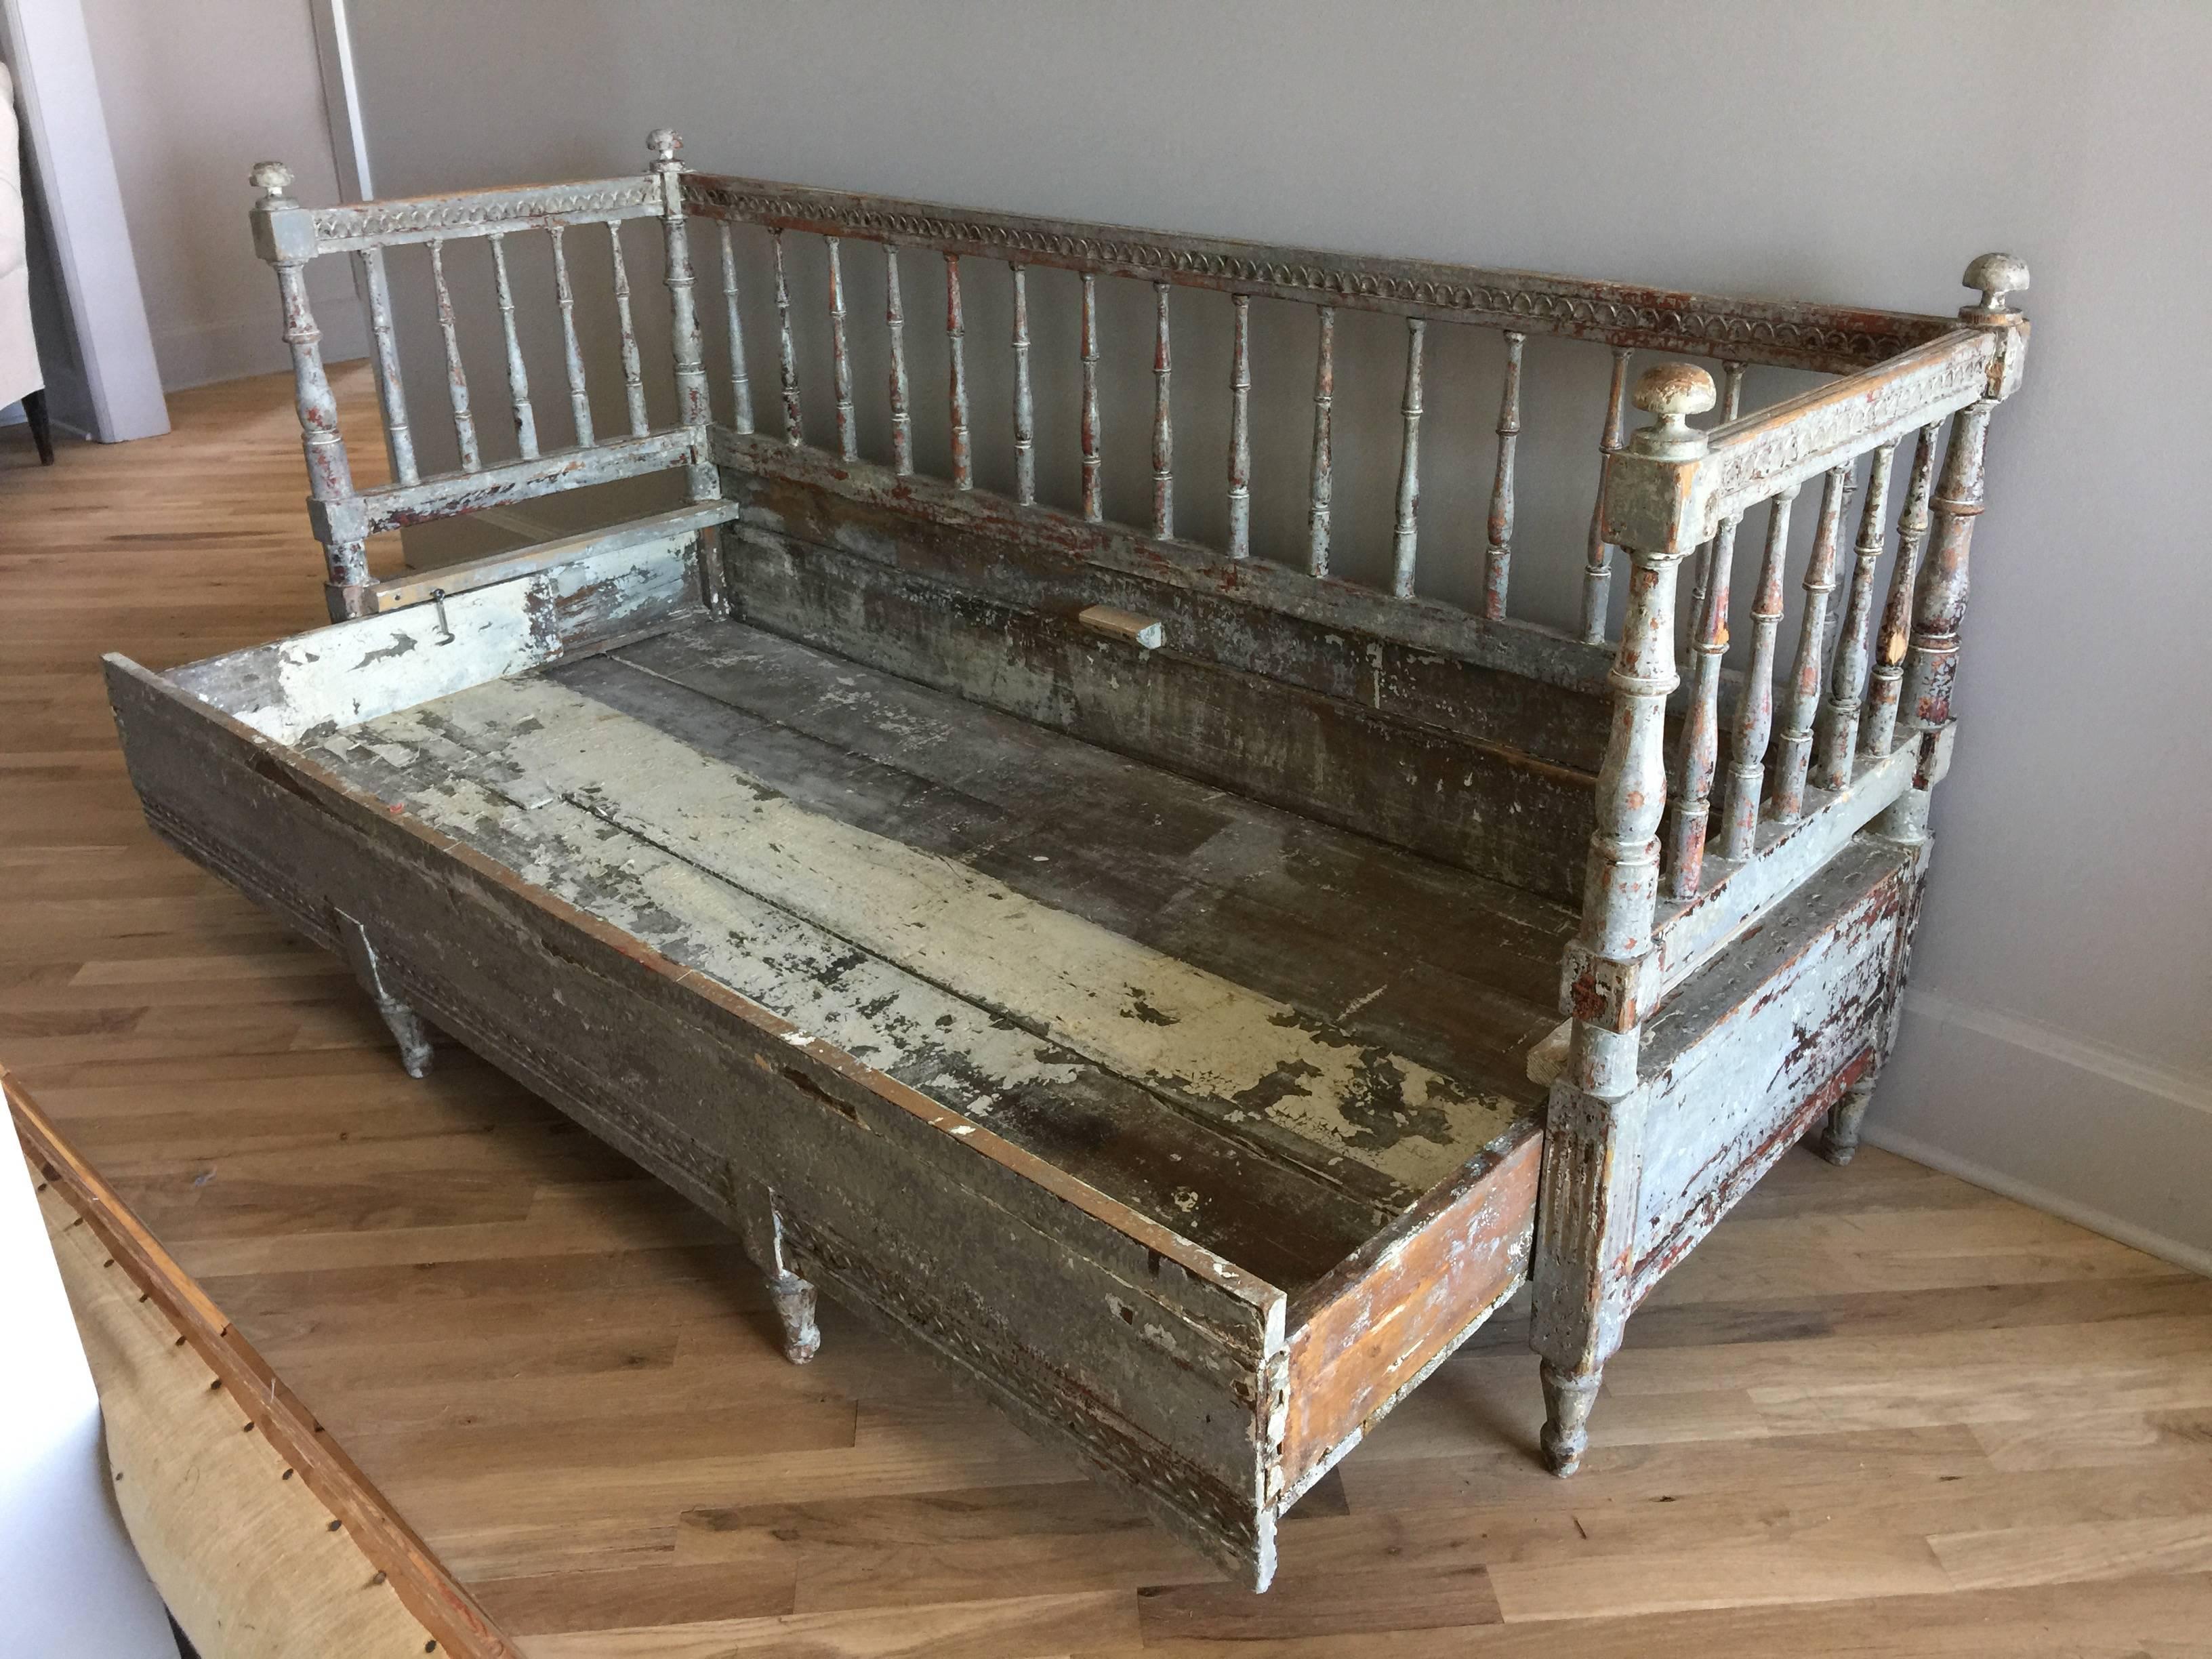 18th century Gustavian daybed with original painted patina. The seat comes off and the lower portion extends to create a bed. Beautiful and practical, Sweden, 1780.